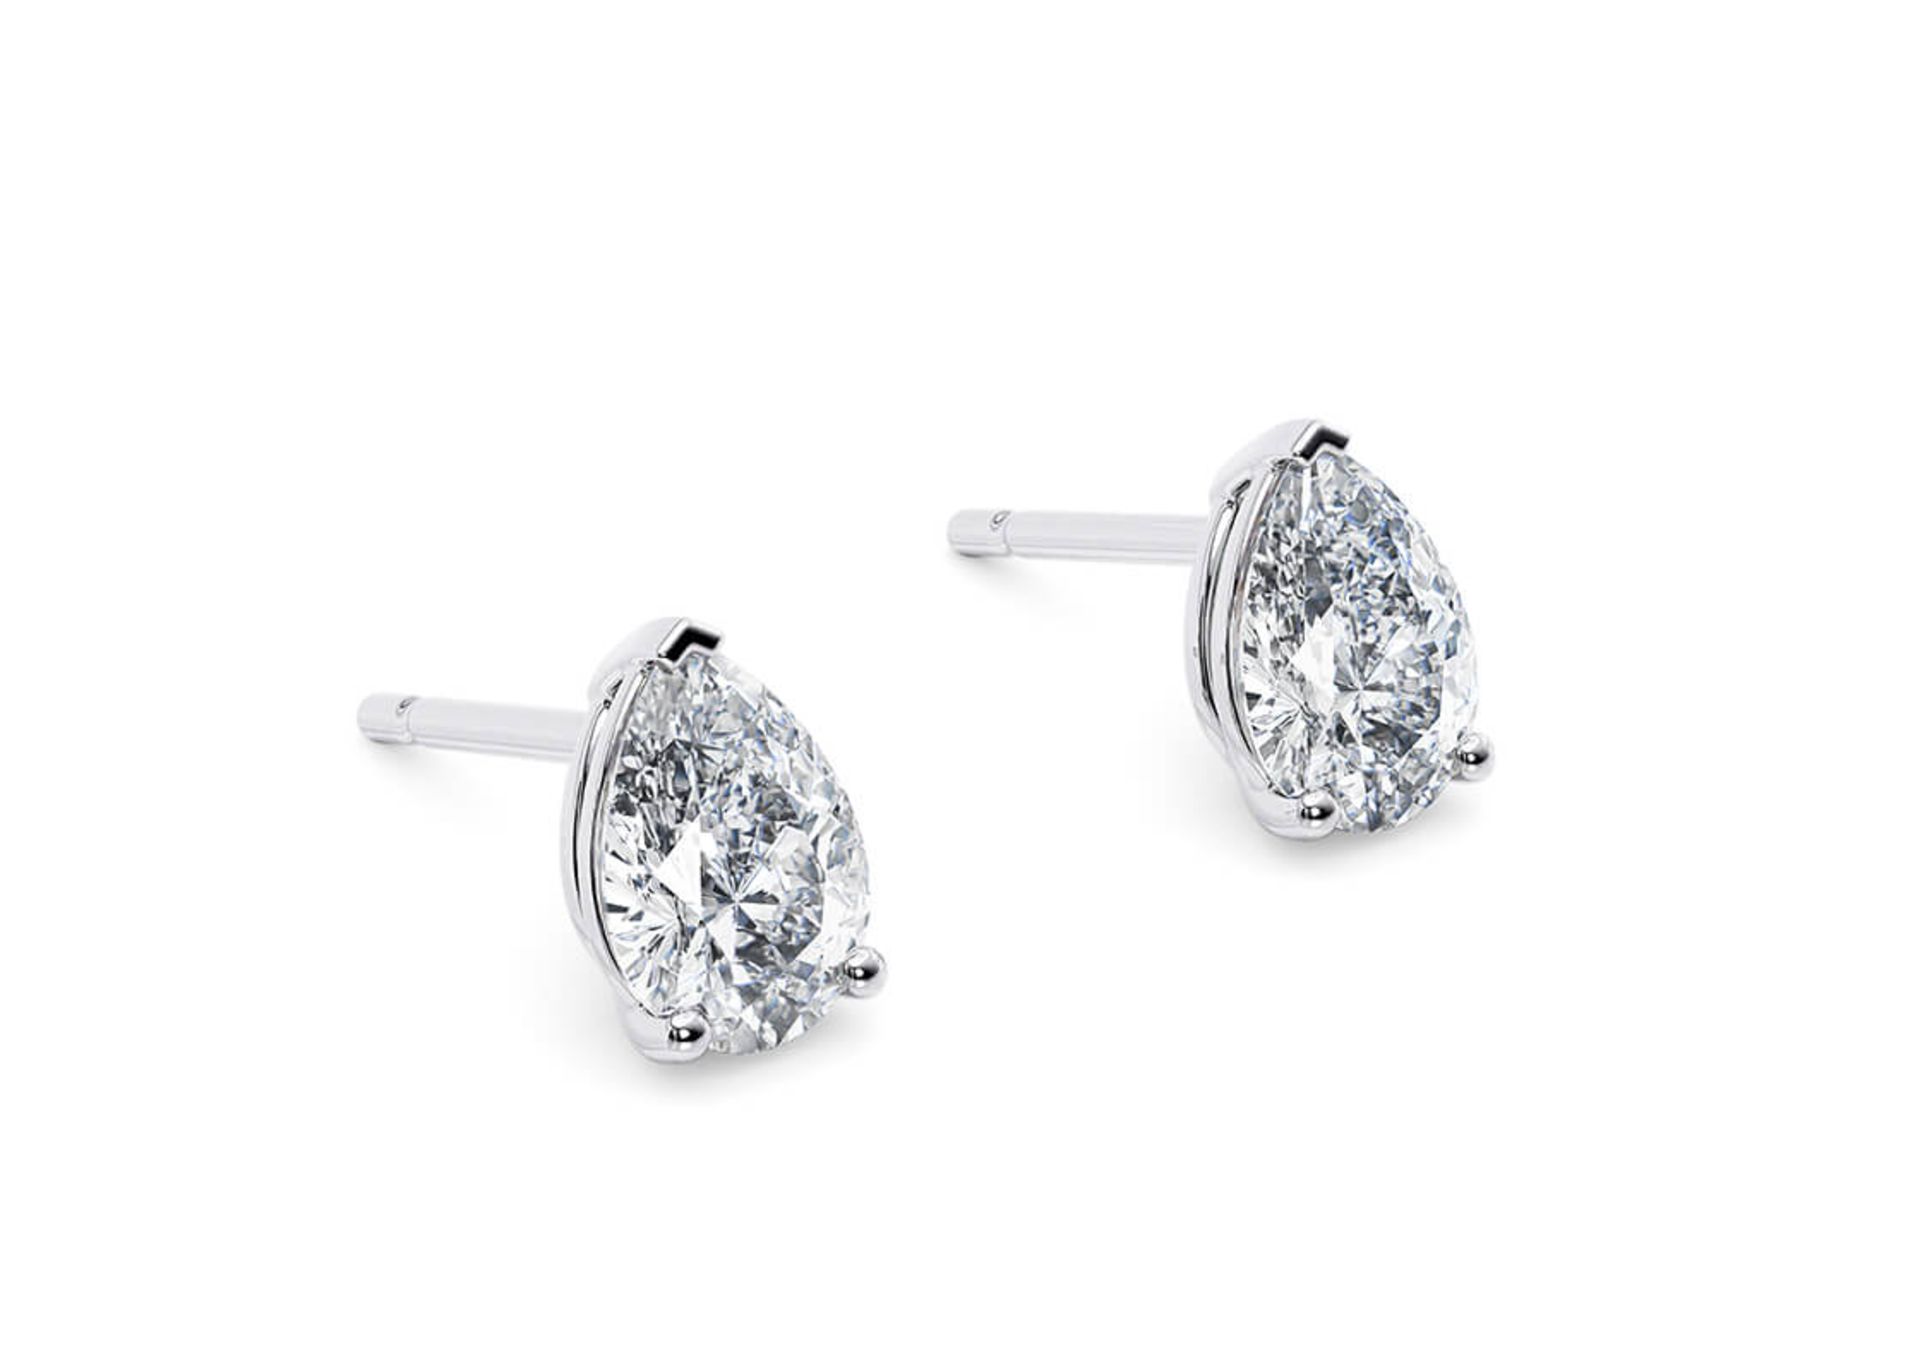 Pear Cut 2.00 Carat Natural Diamond Earrings 18kt White Gold - Colour G - SI Clarity- GIA - Image 2 of 3